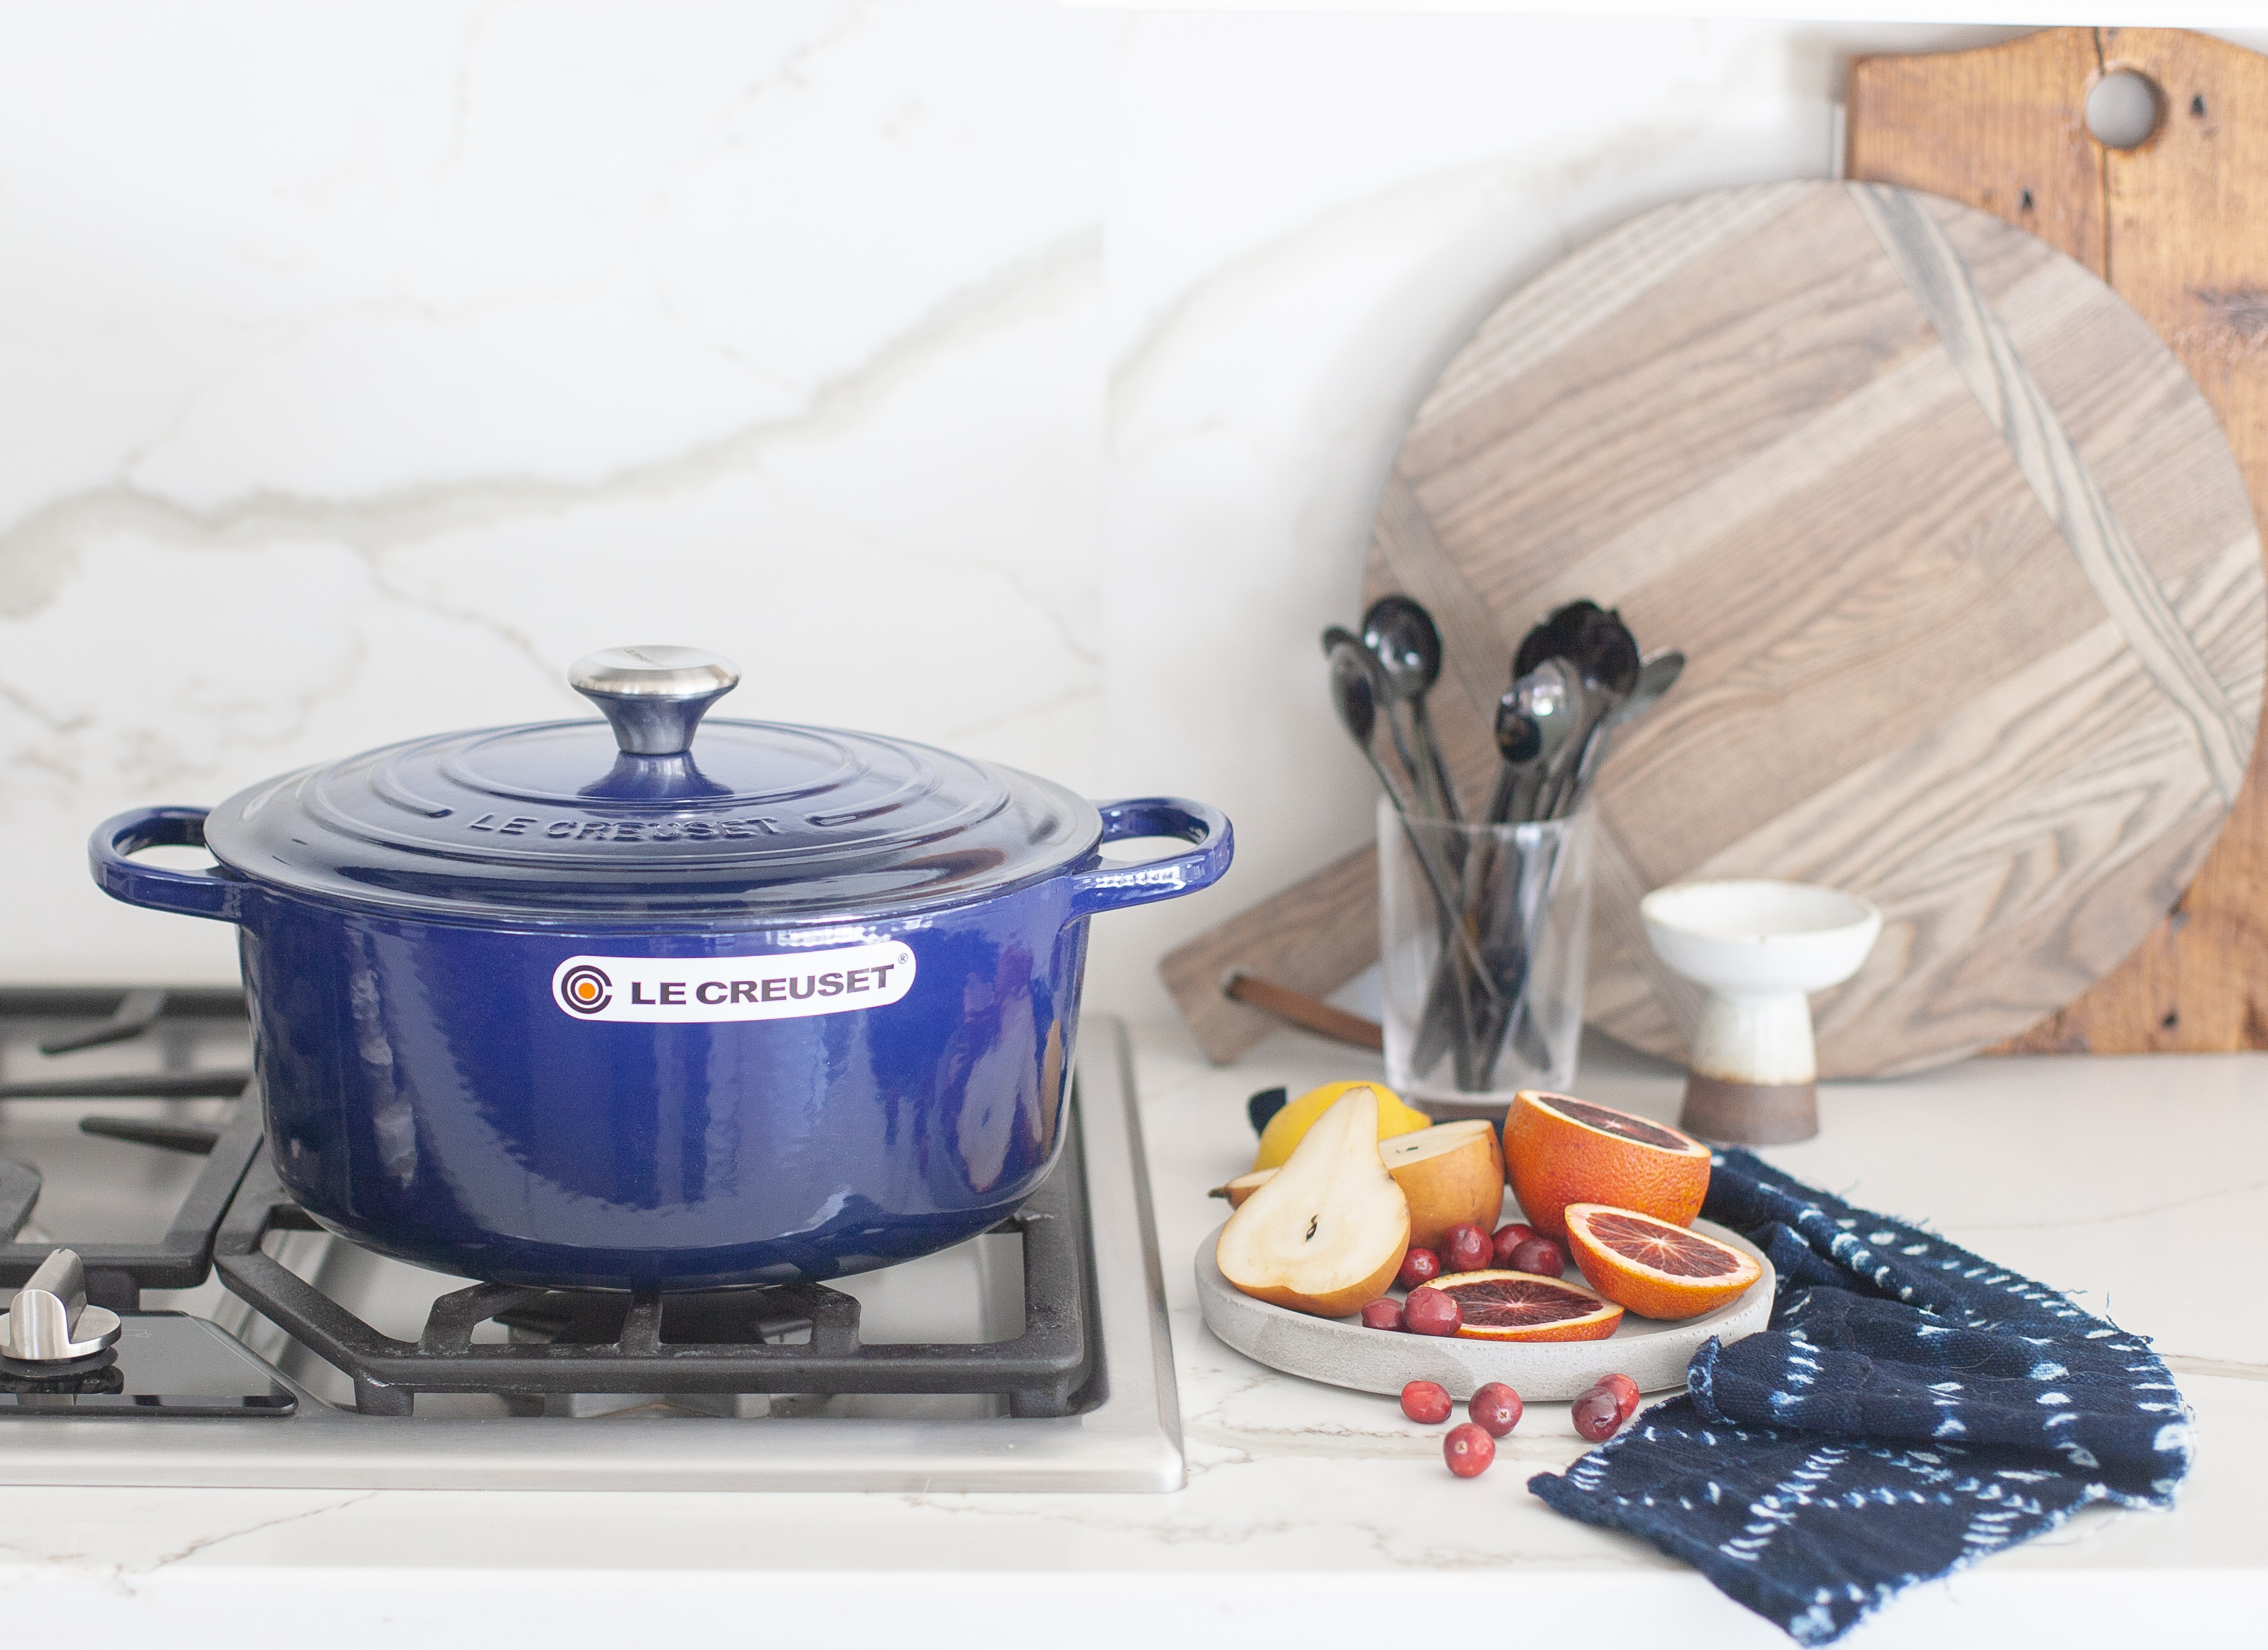 All The Toasty Fall Vibes in One Pot + Giveaway With Le Crueset